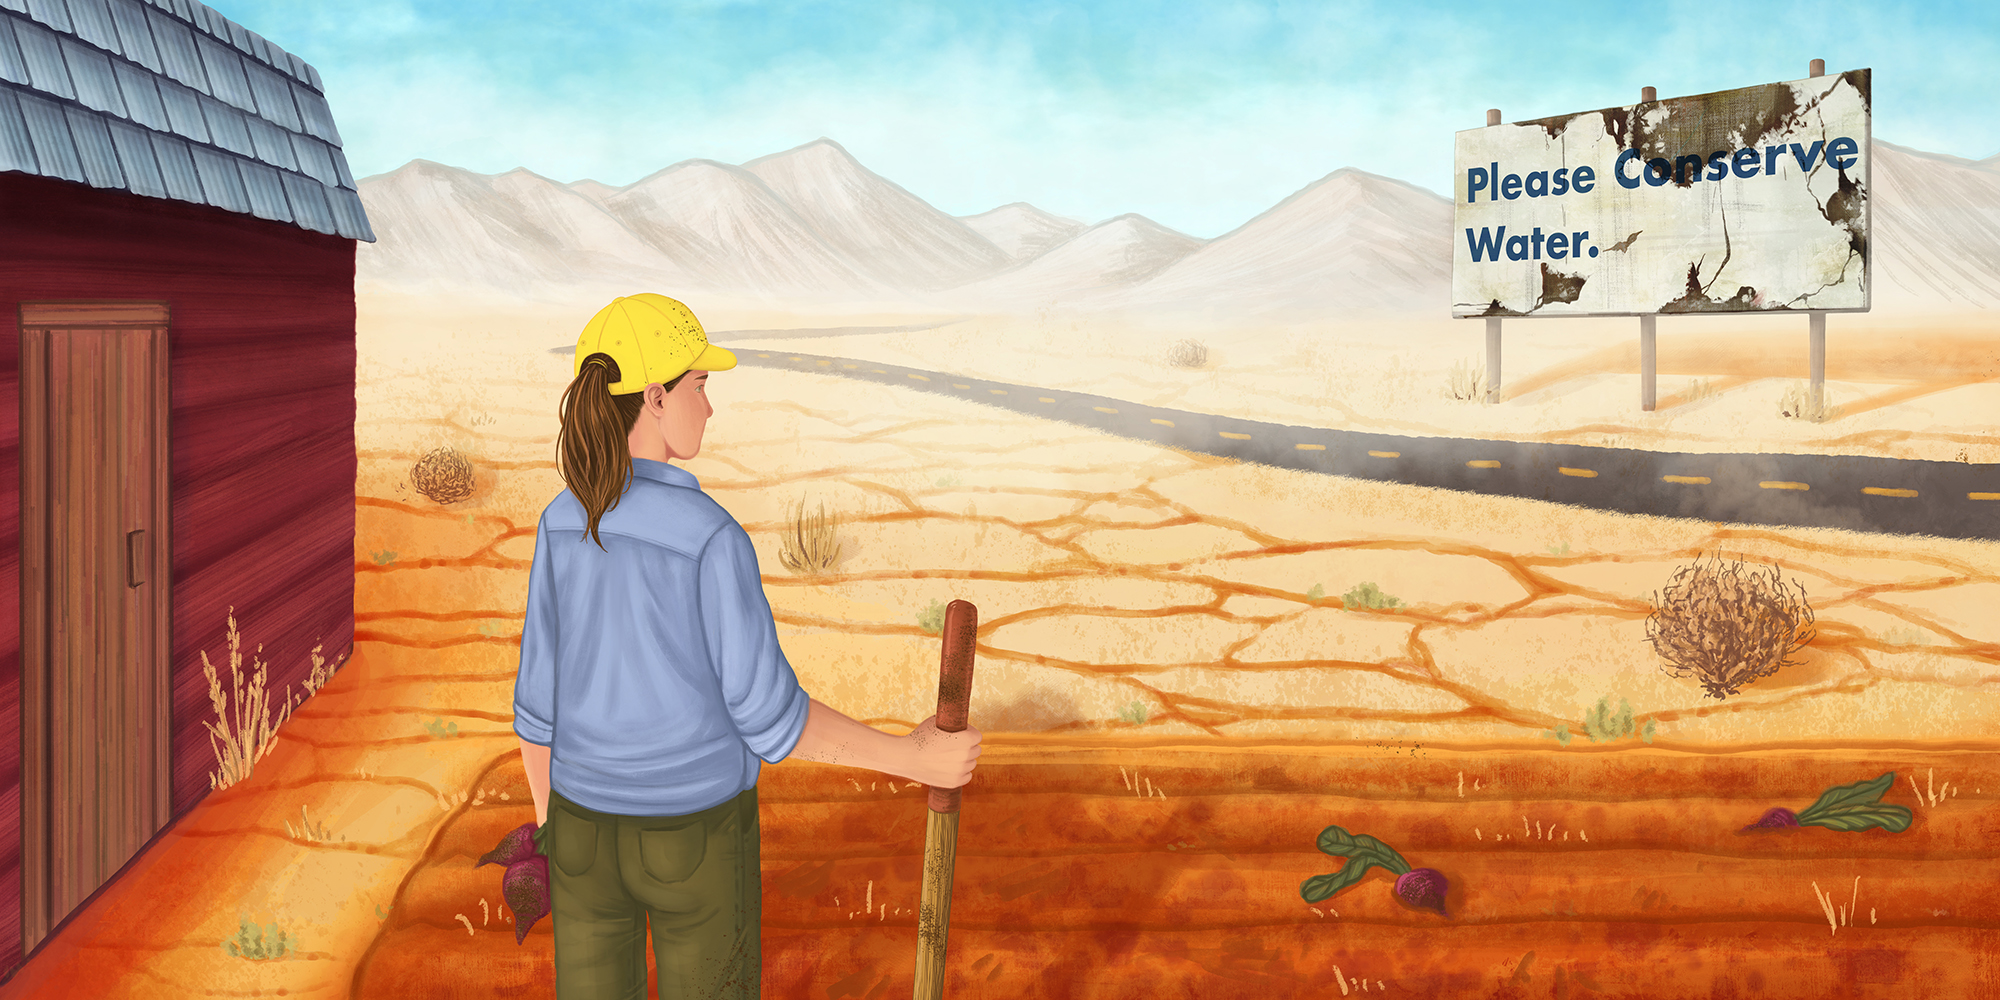 A farmer looks out at barren, dry fields across from a water conservation billboard. 